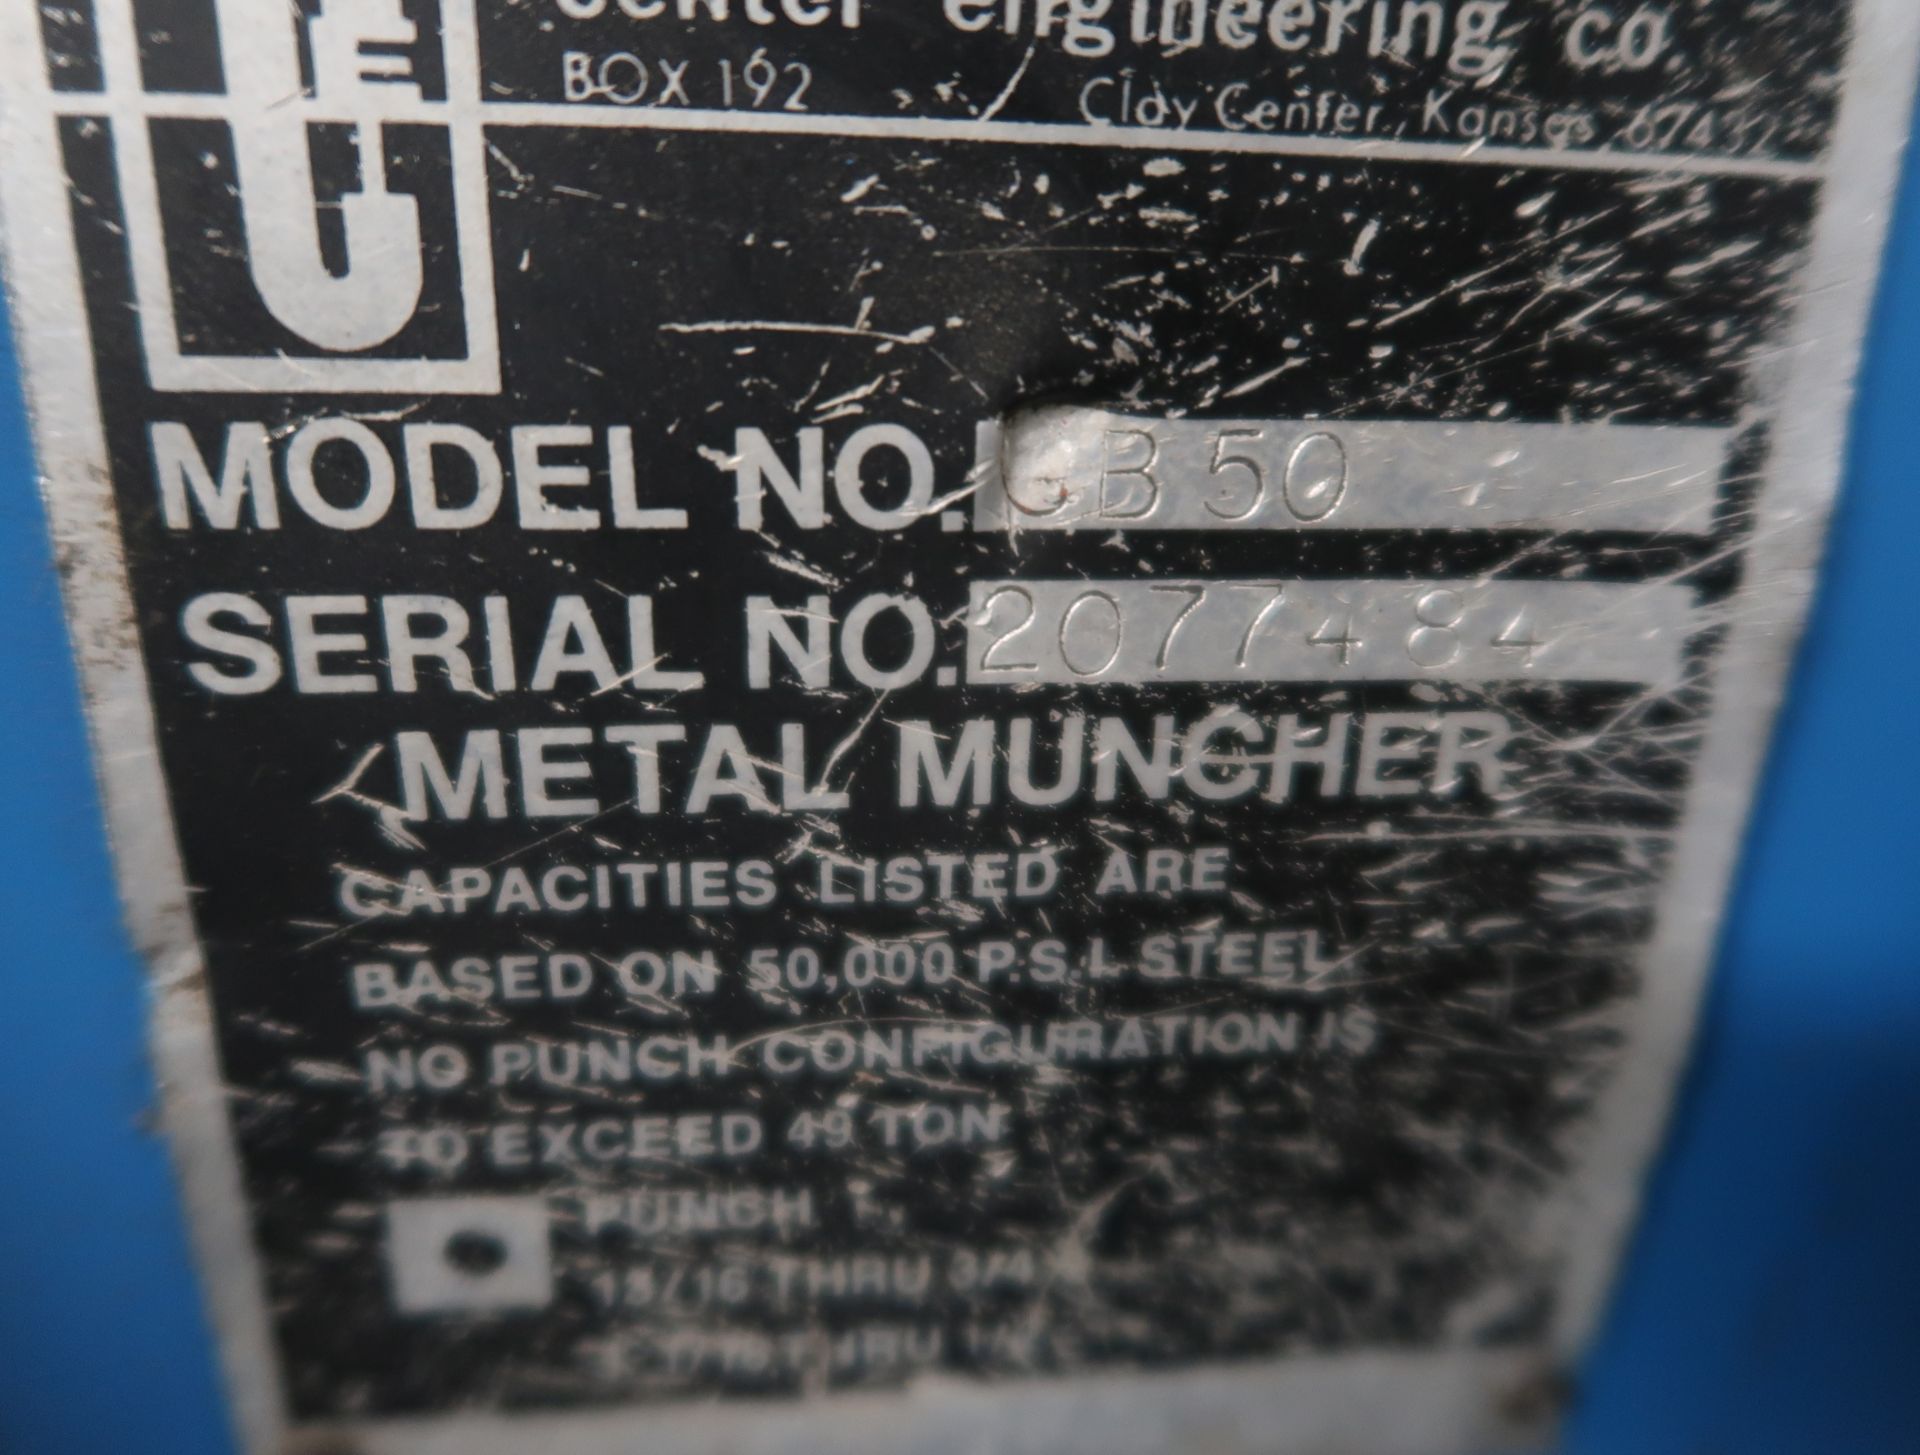 METAL MUNCHER SINGLE END PUNCH, MDL. GB50, SN. 20077484 - Image 3 of 3